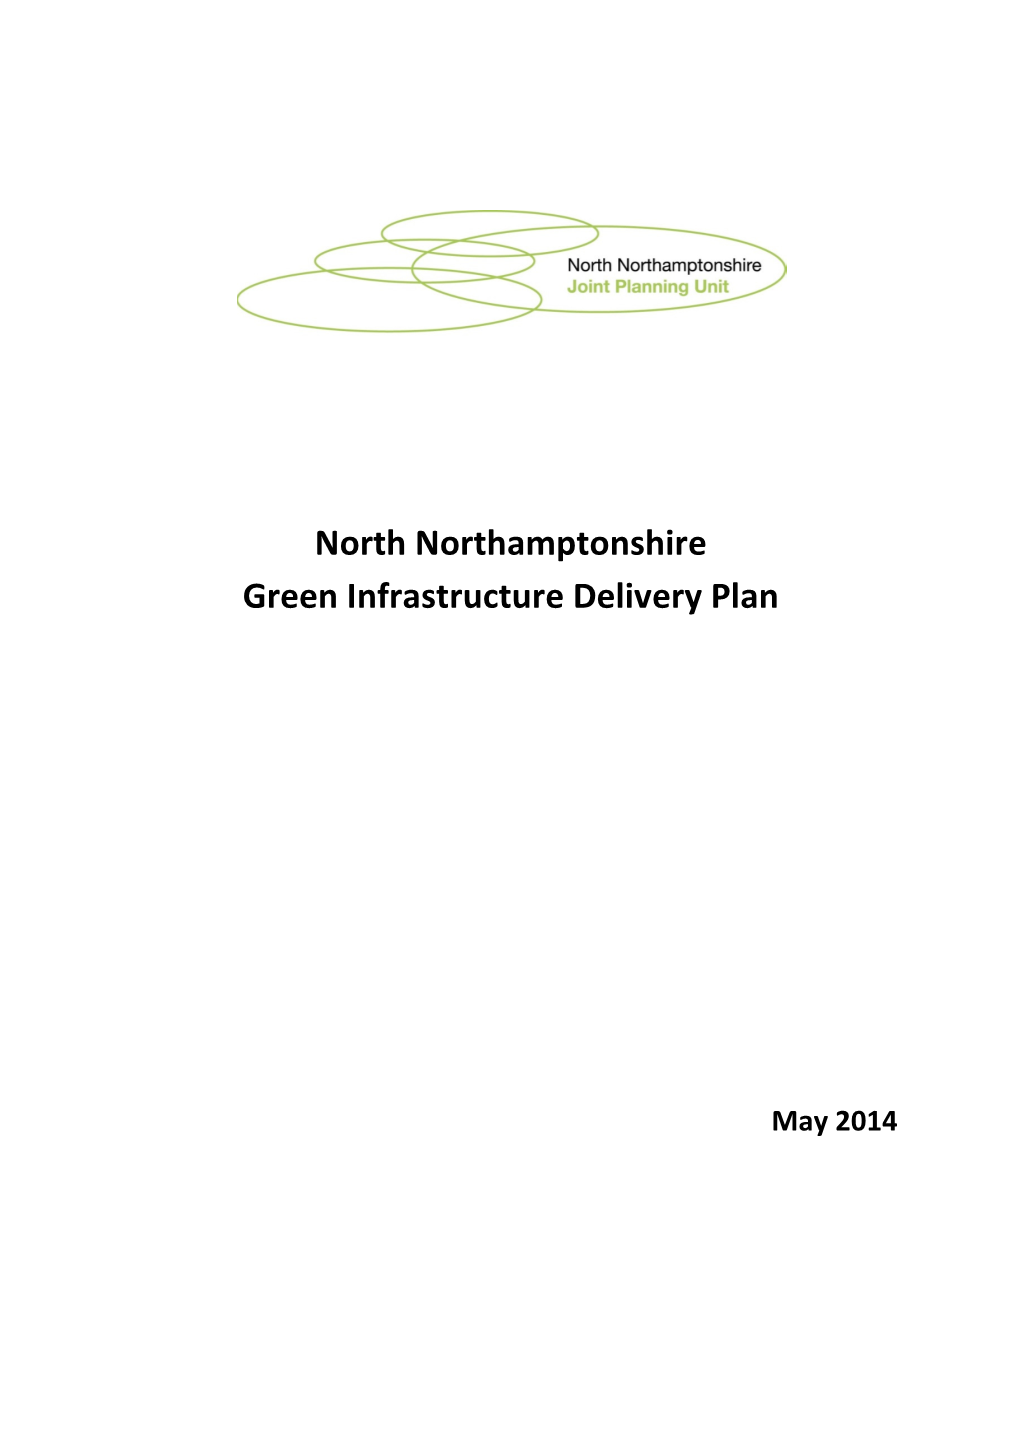 North Northamptonshire Green Infrastructure Delivery Plan